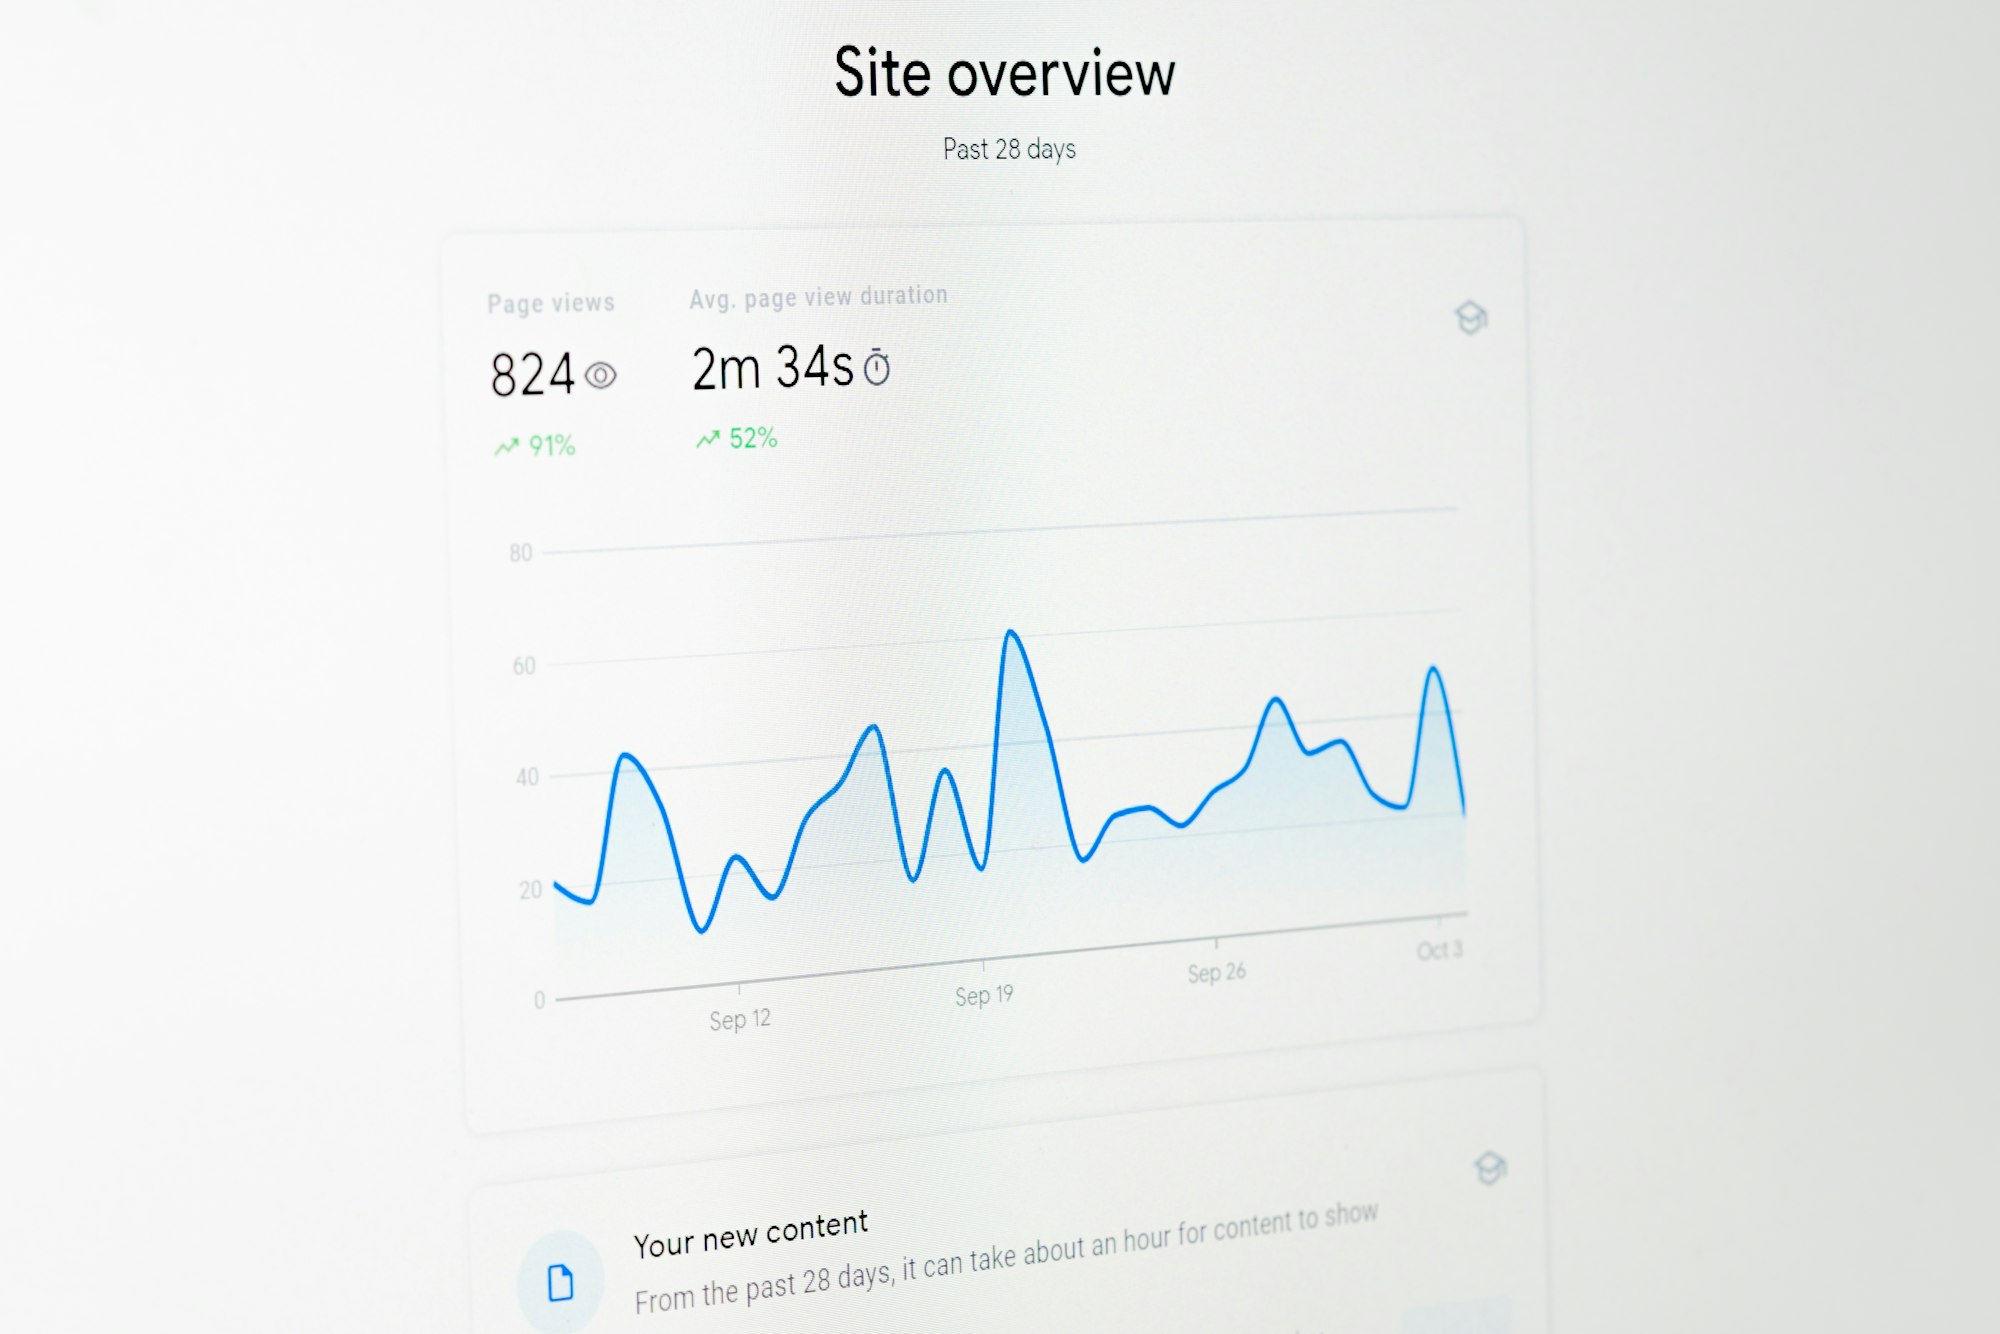 Google Site overview analytics for a blog.